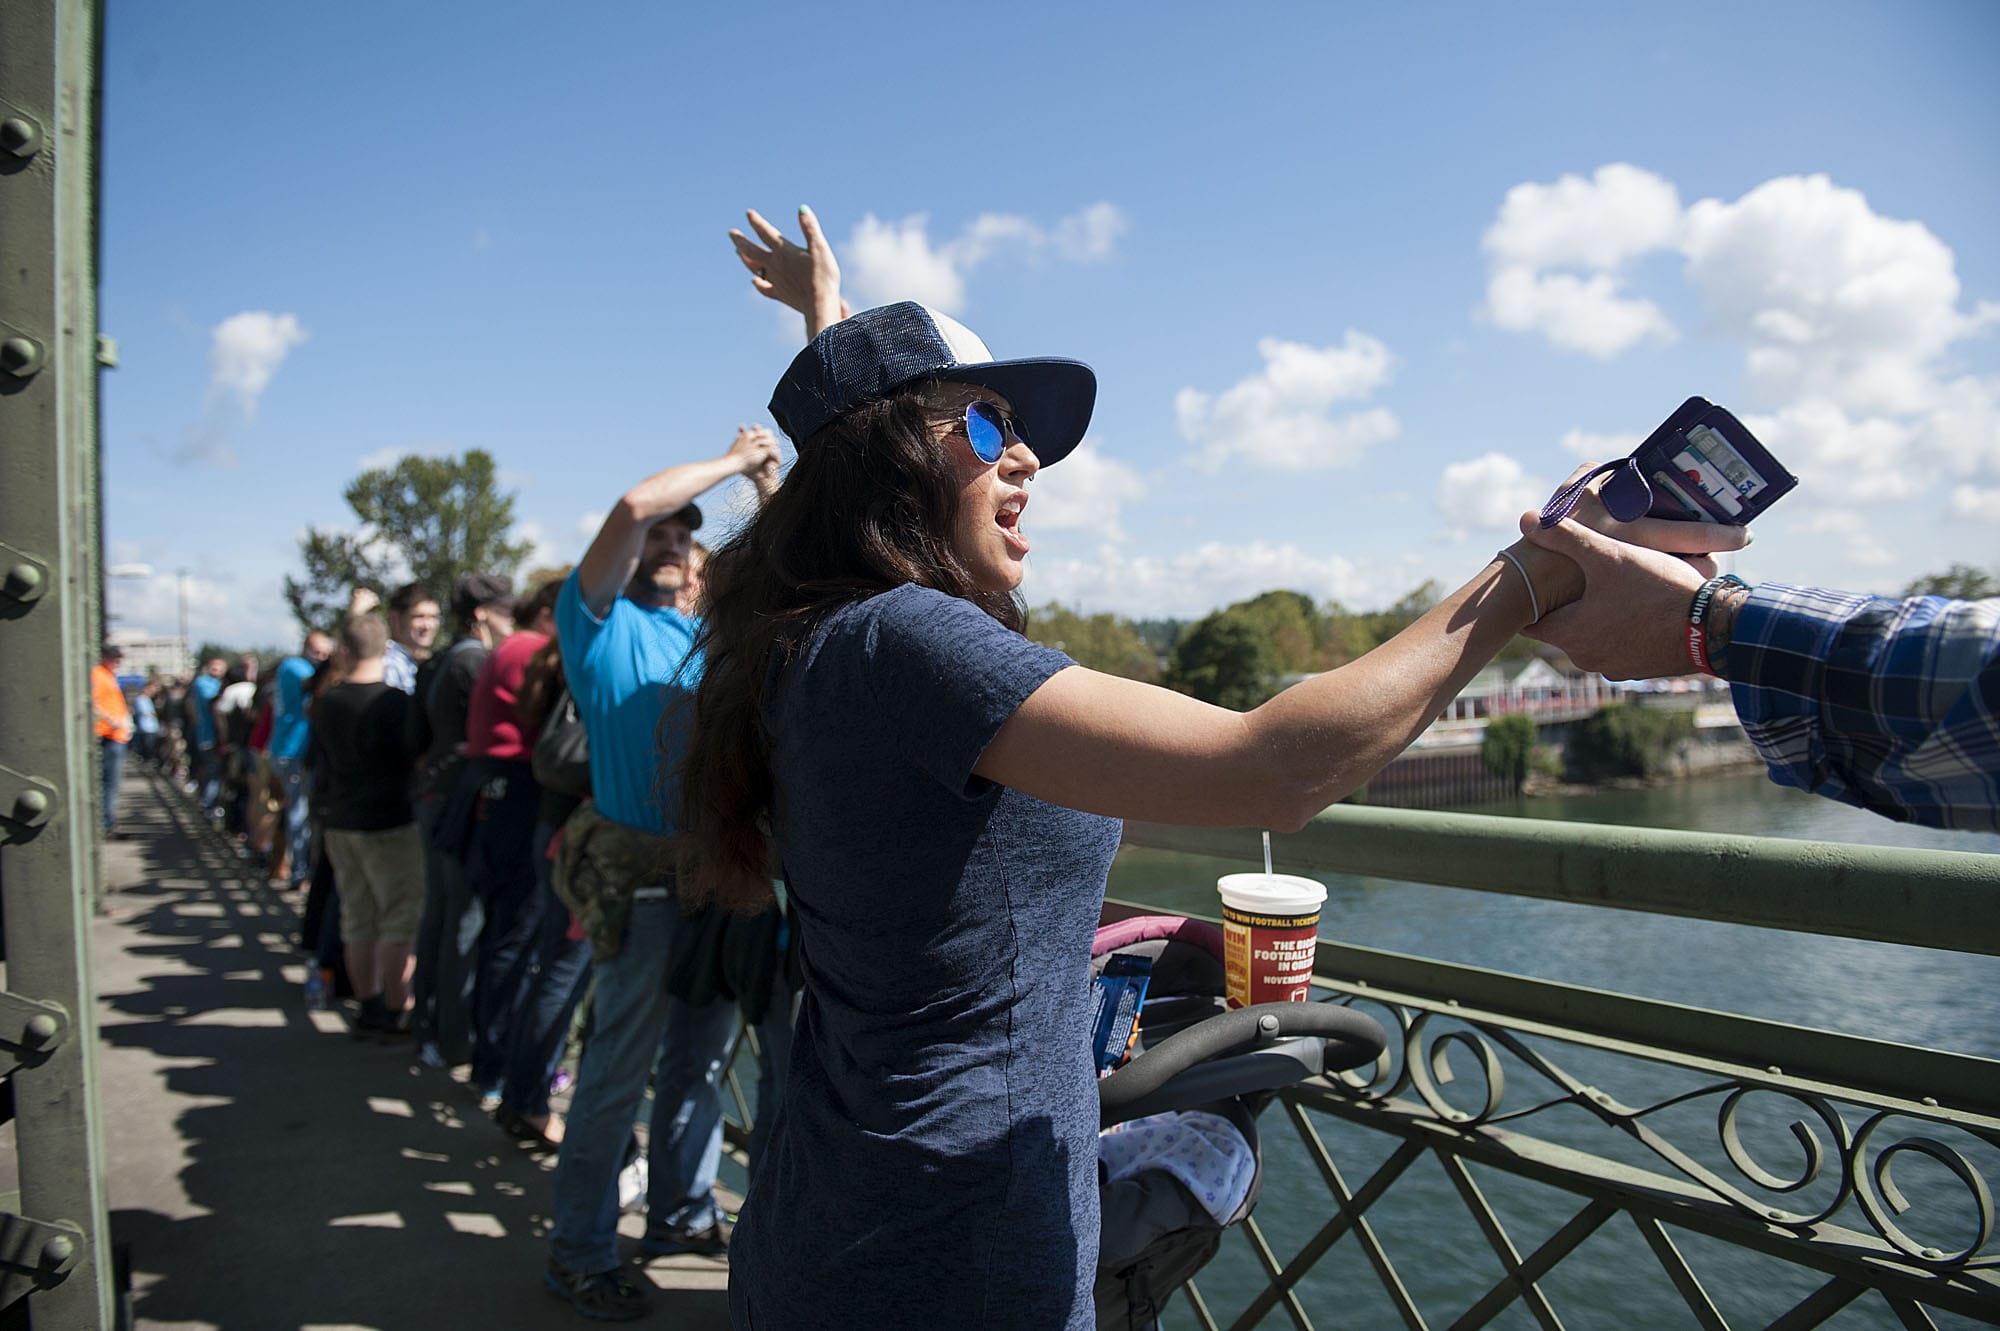 Vanessa McKnight, center, of Vancouver celebrates almost five years of sobriety while joining other participants on the Interstate Bridge during the Hands Across the Bridge event Monday afternoon, Sept. 7, 2015.